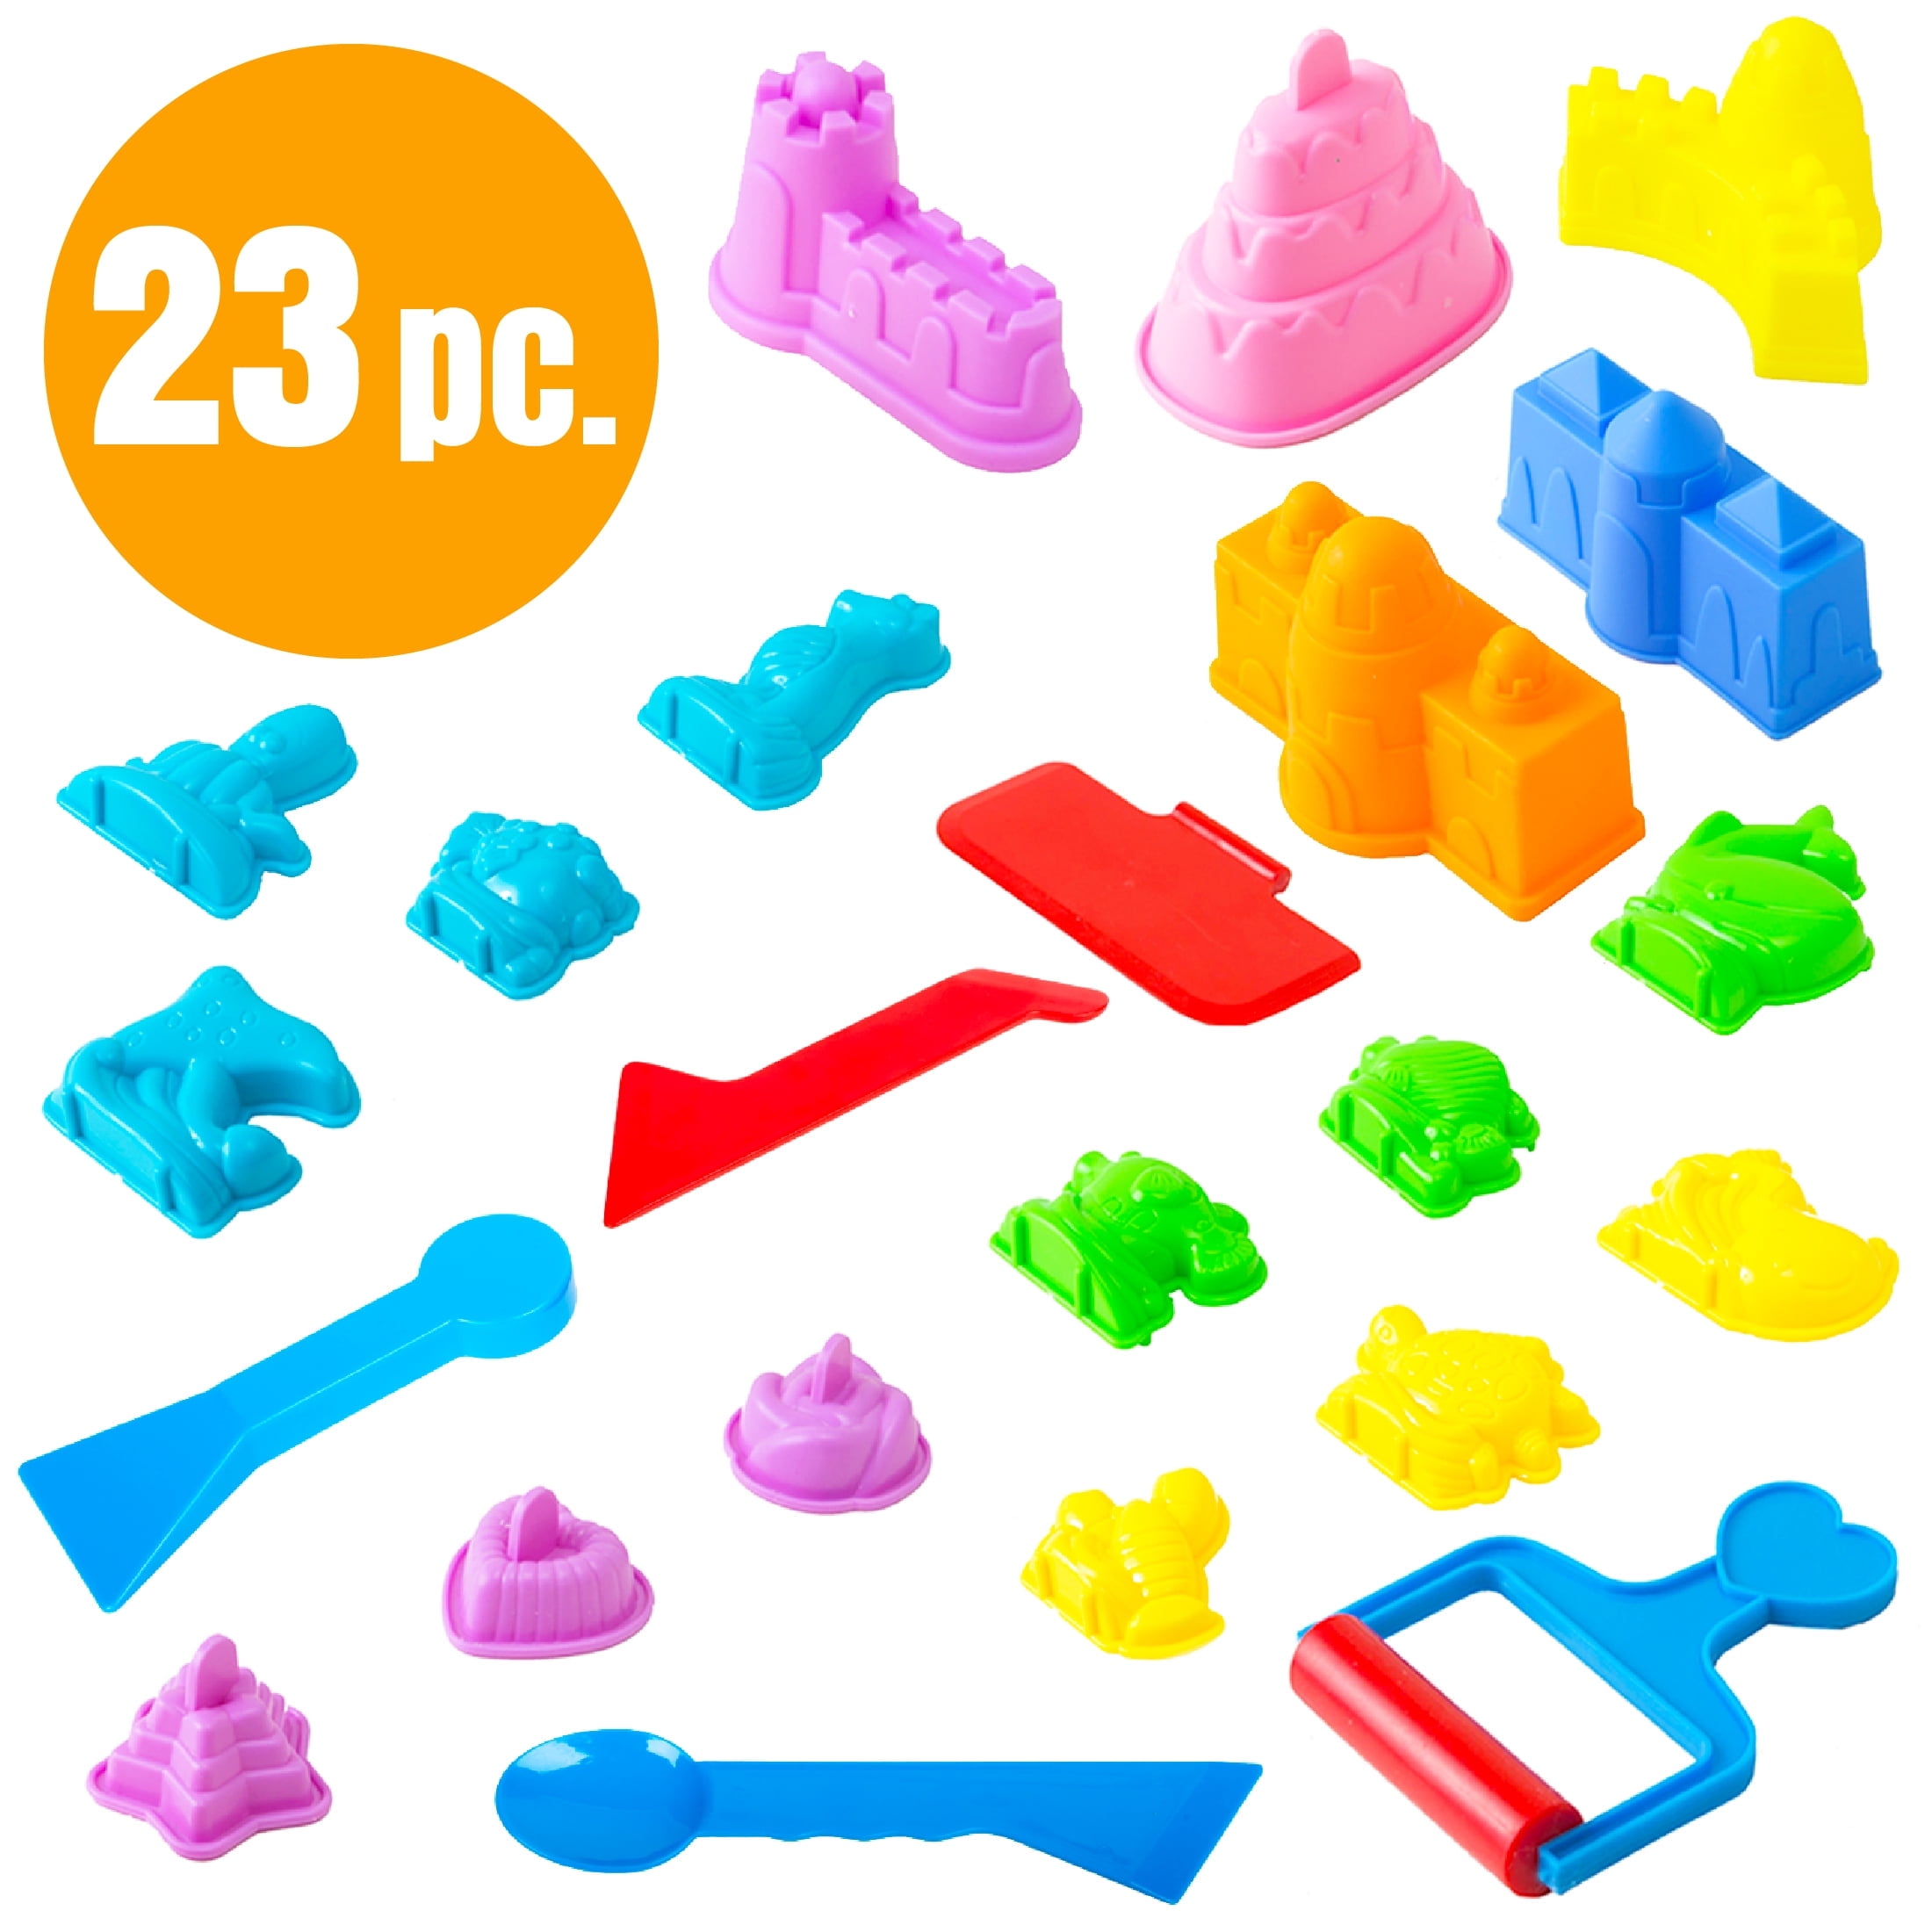 USA Toyz 23-piece multi-color sand molds kit for children 3+ years